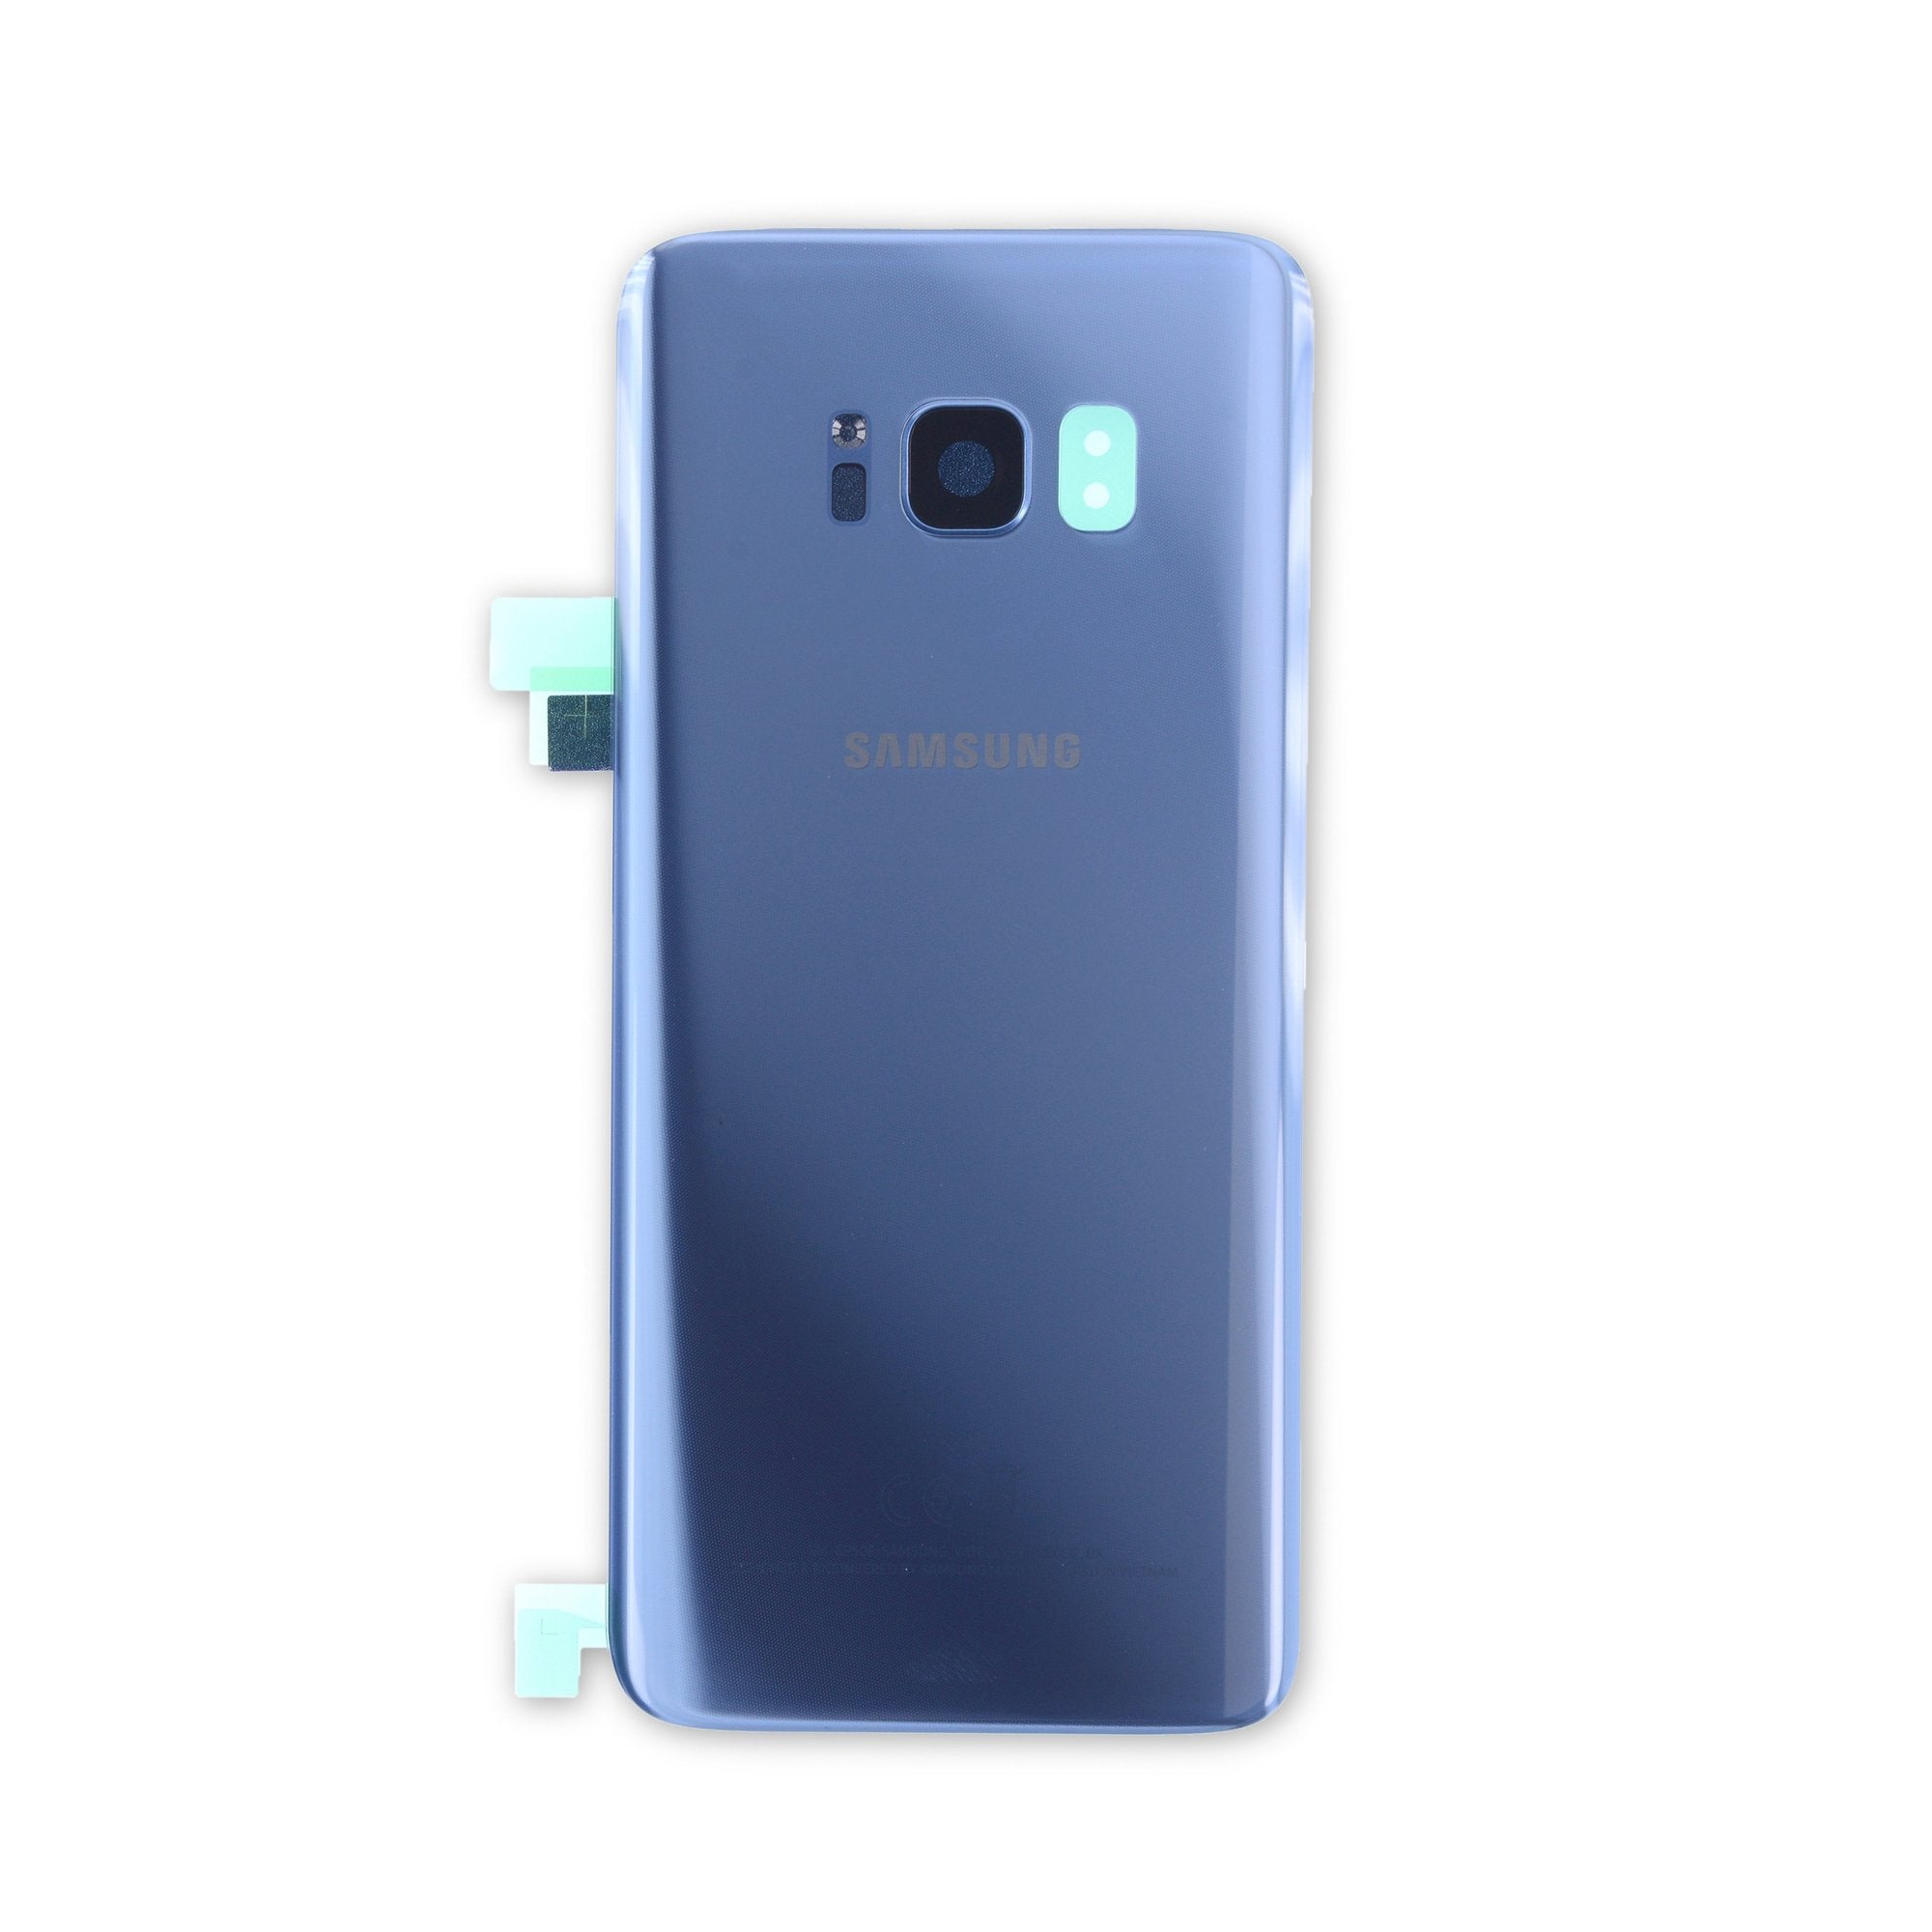 Galaxy S8 Rear Glass Panel/Cover - Original Blue New Part Only